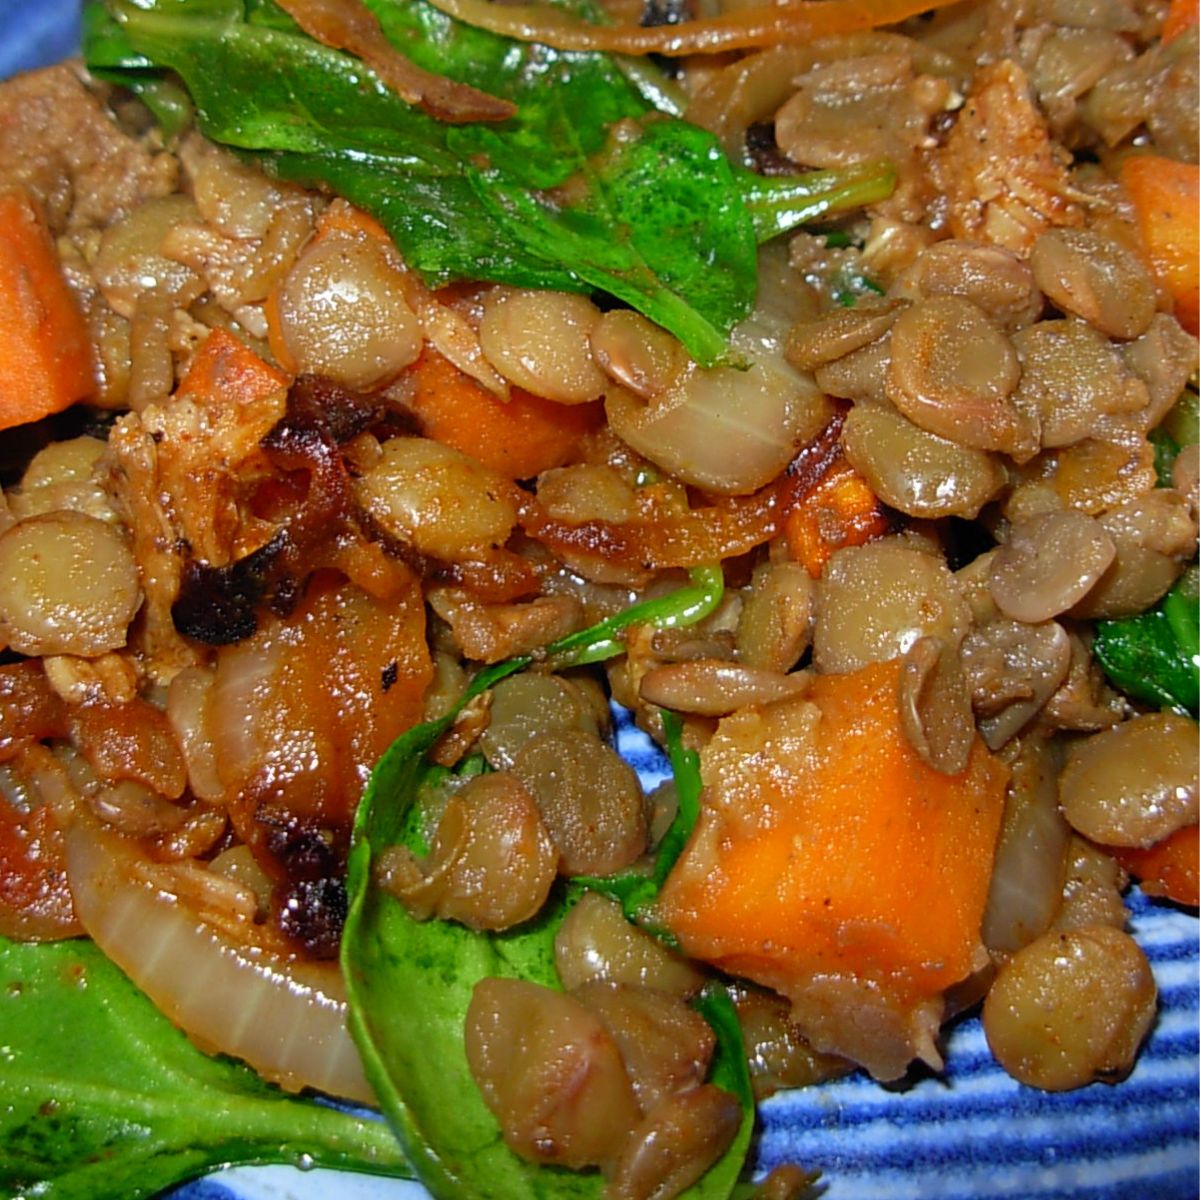 Lamb and lentil stew with caramelized onions, carrots, and spinach leaves.